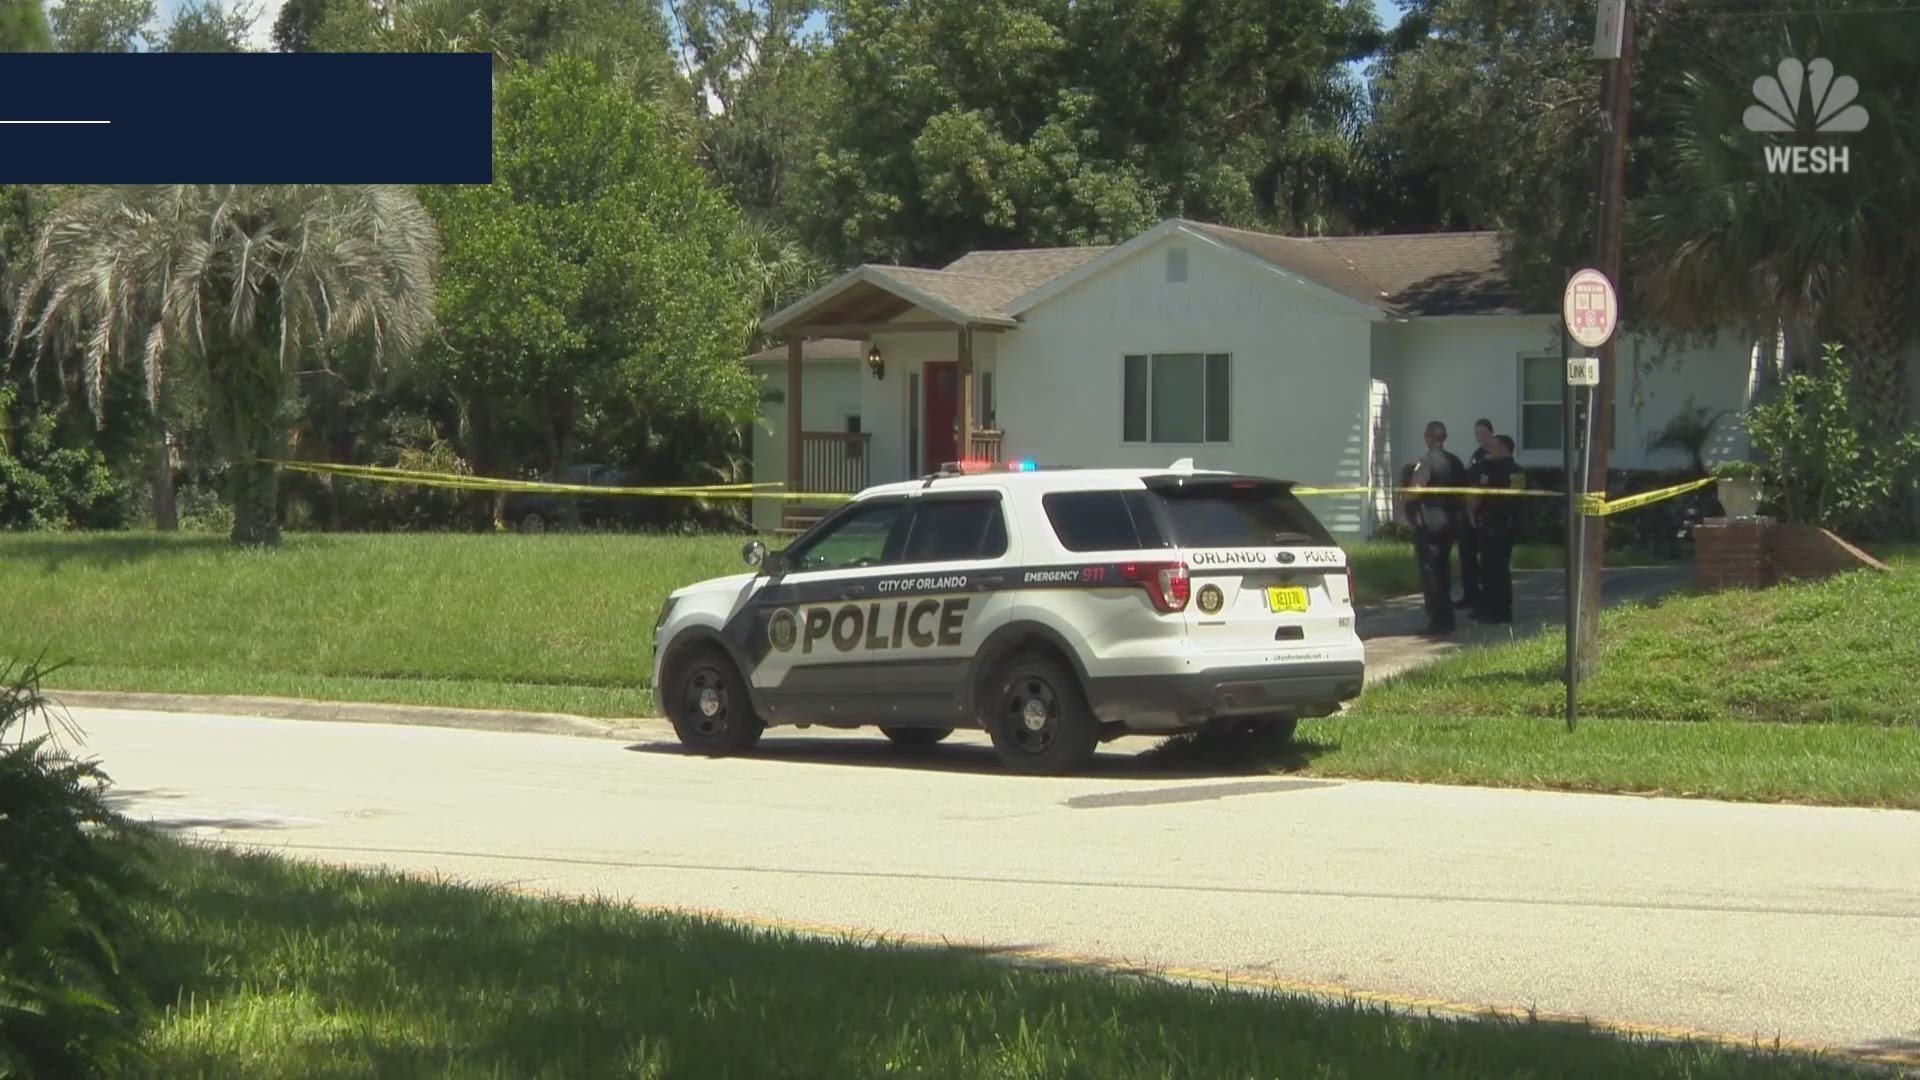 Orlando police said a 3-year-old died after climbing into a washing machine and getting trapped inside.